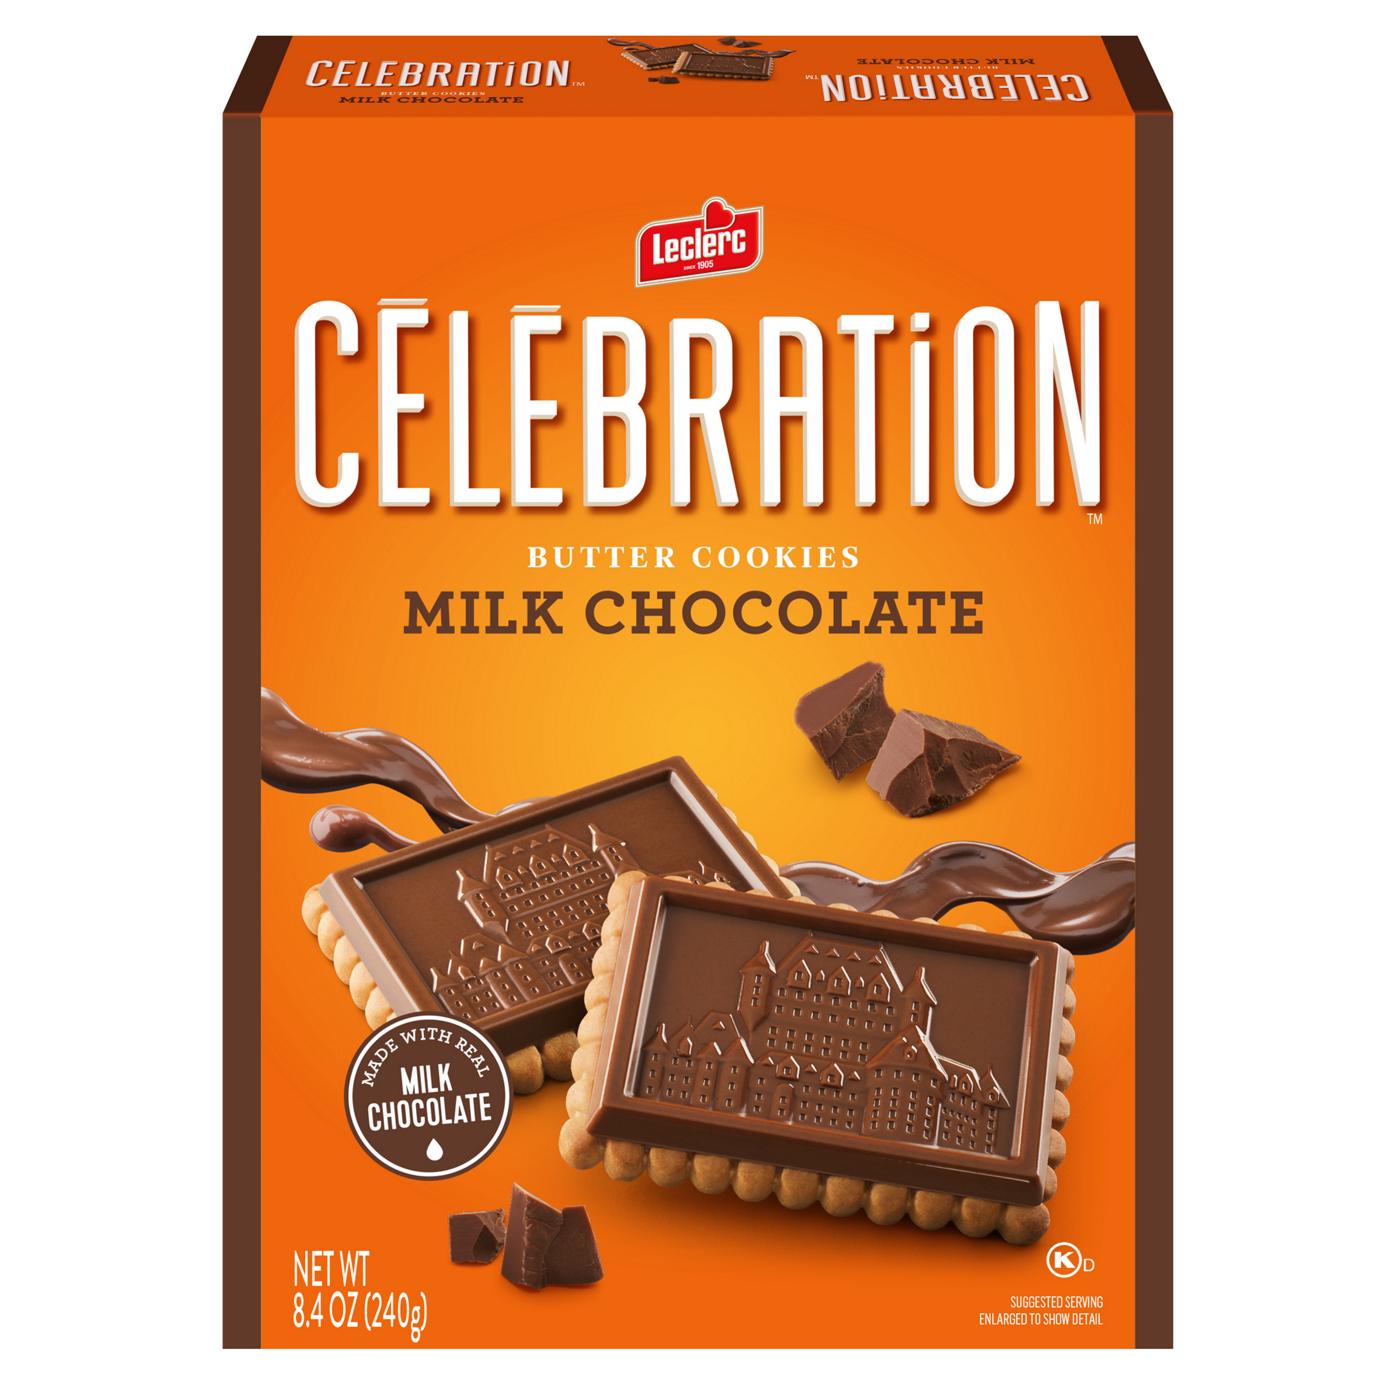 Leclerc Celebration Milk Chocolate Butter Cookies; image 1 of 2